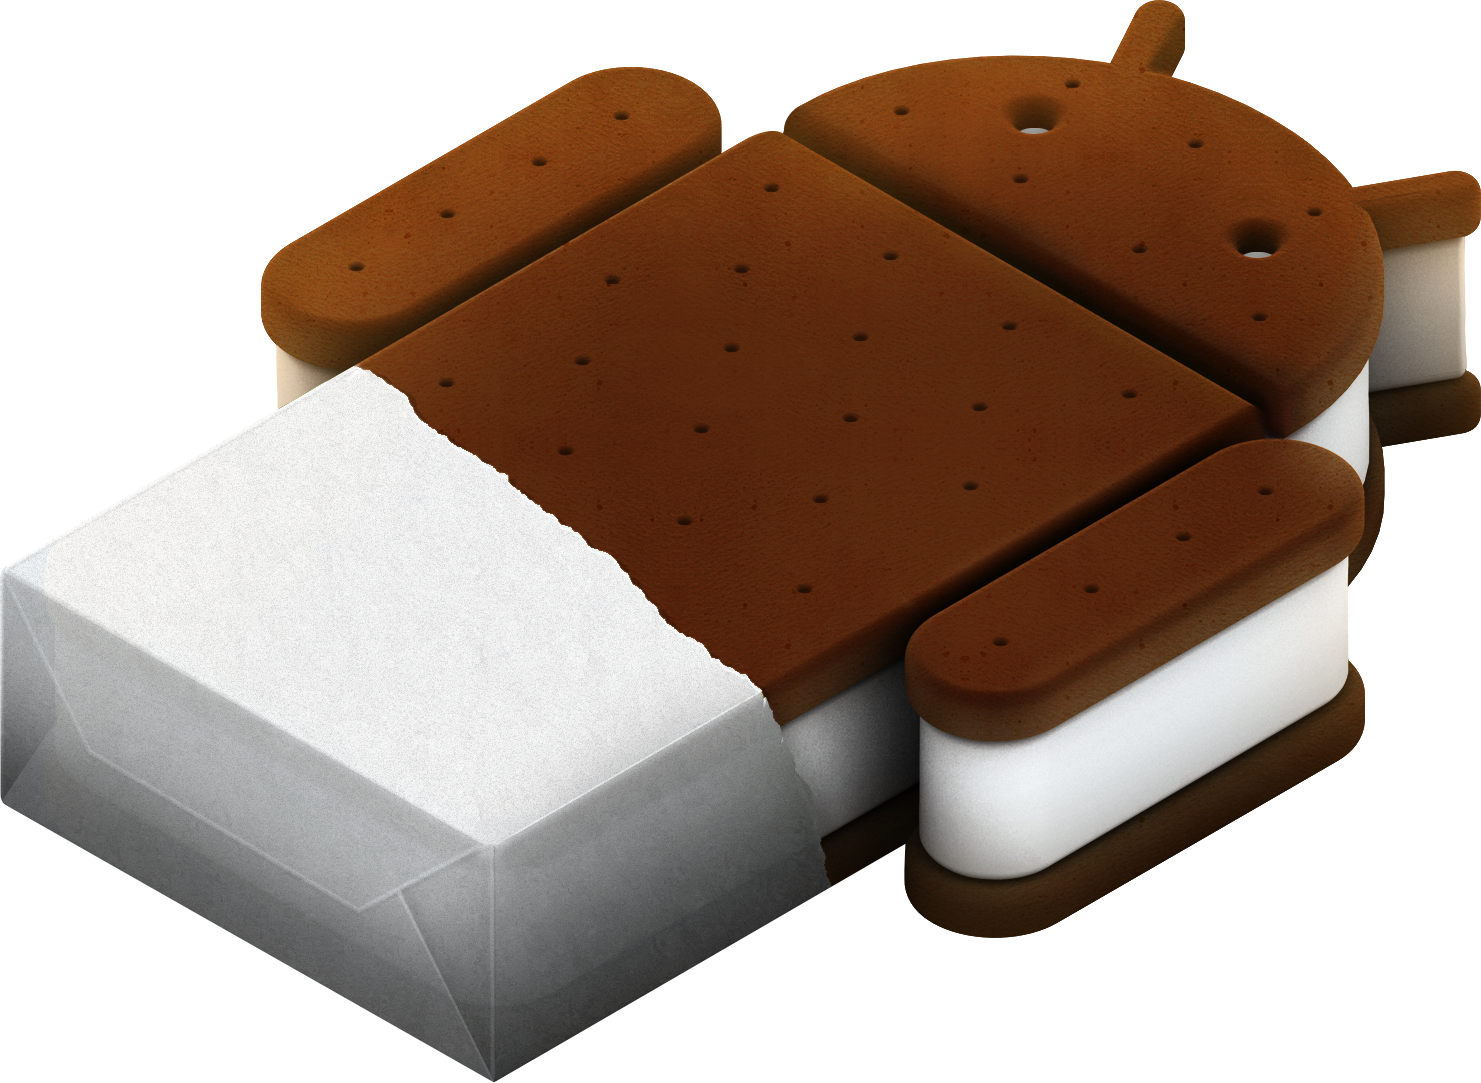 Ice cream sandwich for android download windows 10